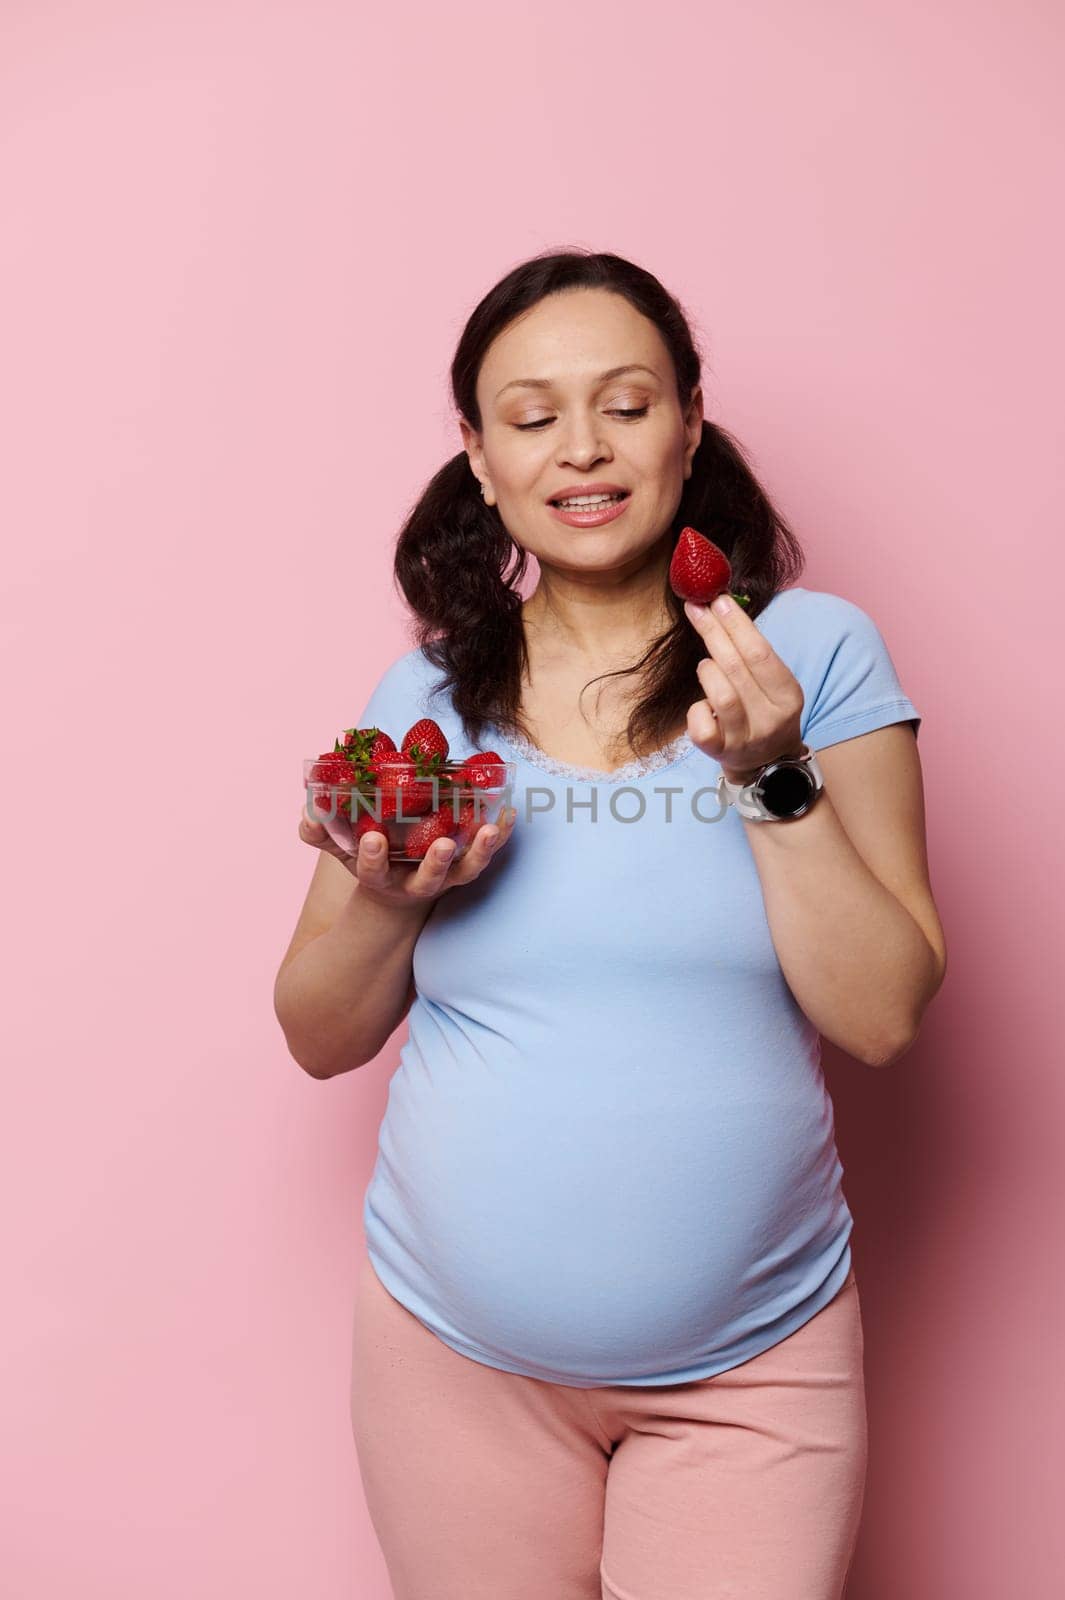 Pregnant vegetarian woman eats fresh tasty sweet strawberries. Organic nutrition and balanced diet for expectant mother by artgf